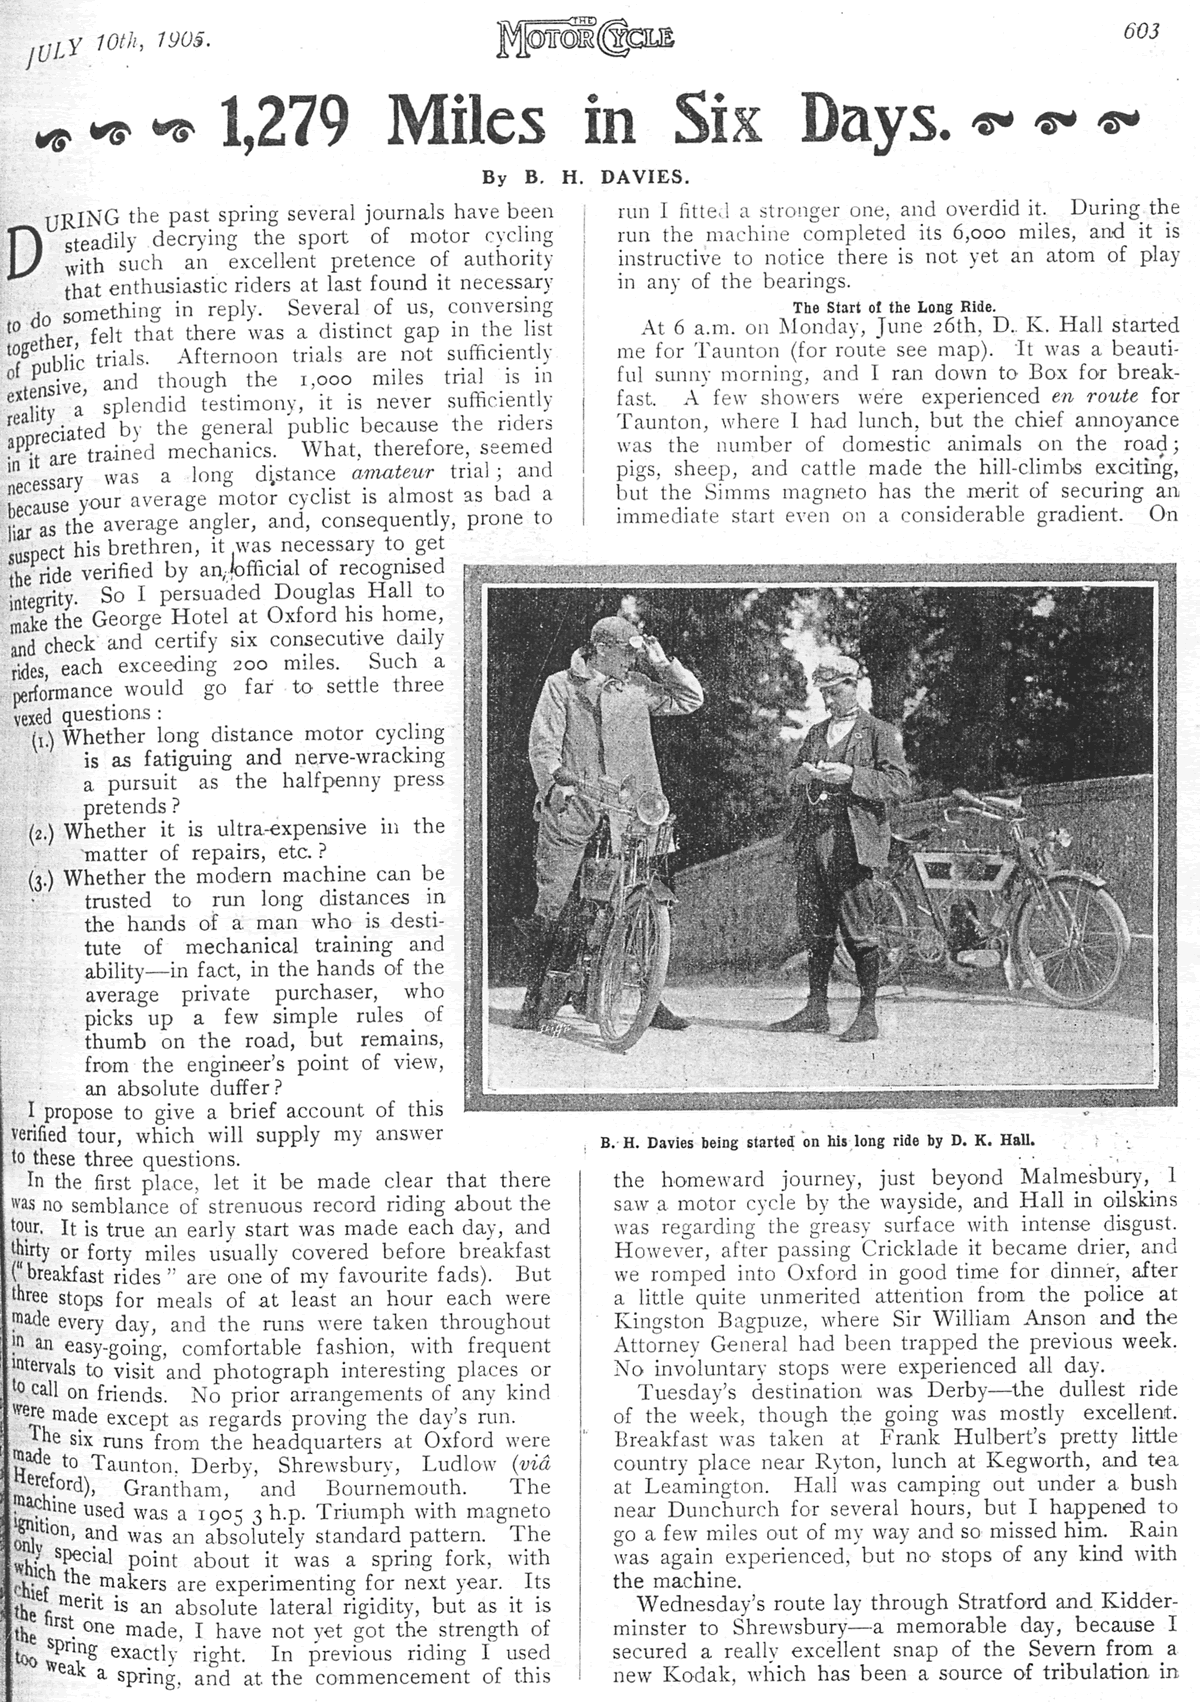 ixion 1905 article page 1